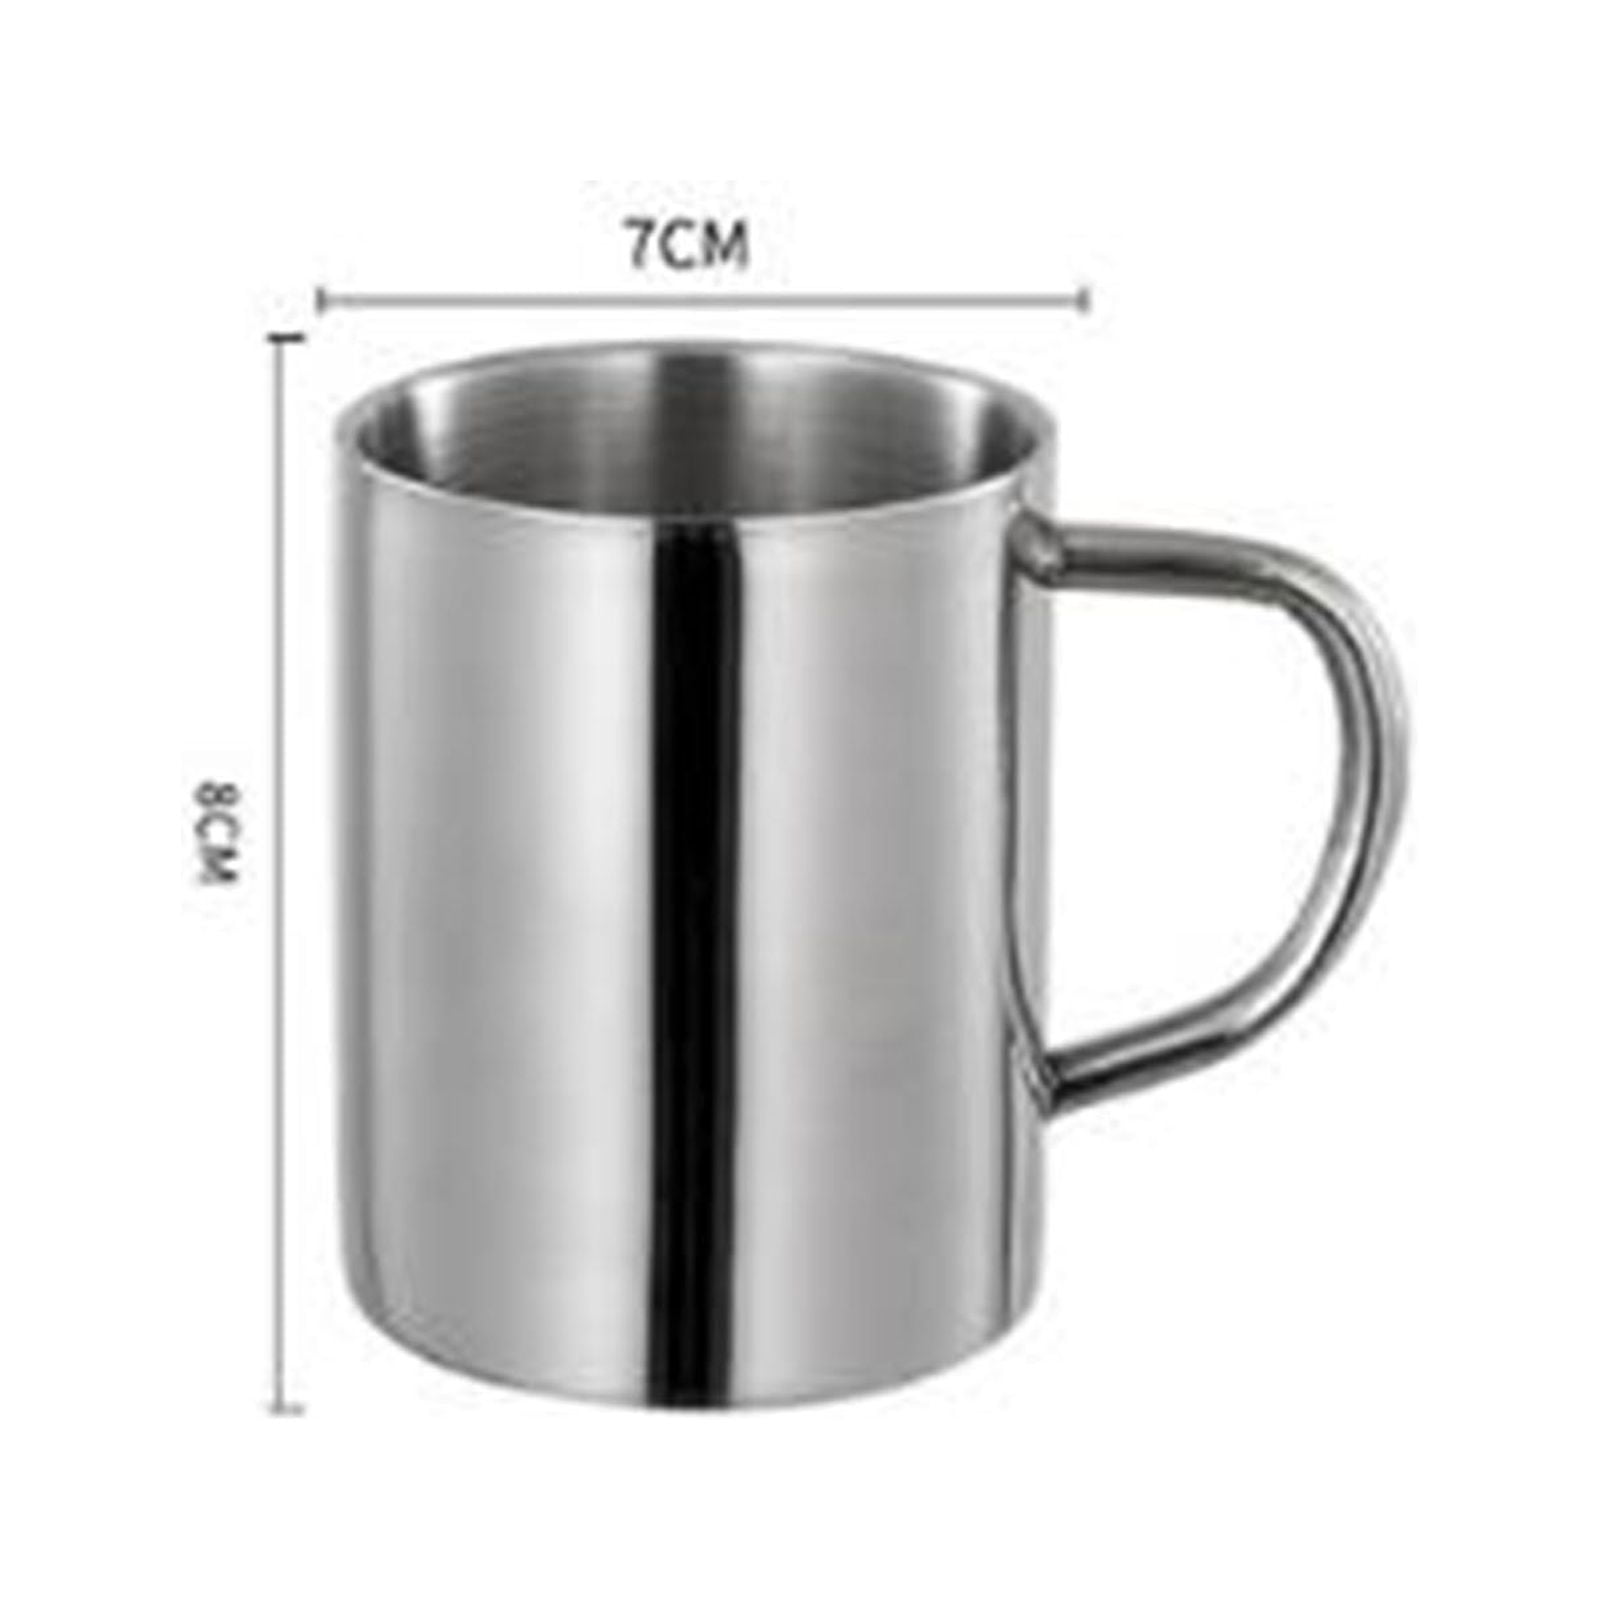 The Clean Hydration MUG12002 12 oz Insulated Stainless Steel Coffee Mug Cup with Ceramic Inner Coating & No Metal Taste - Gray